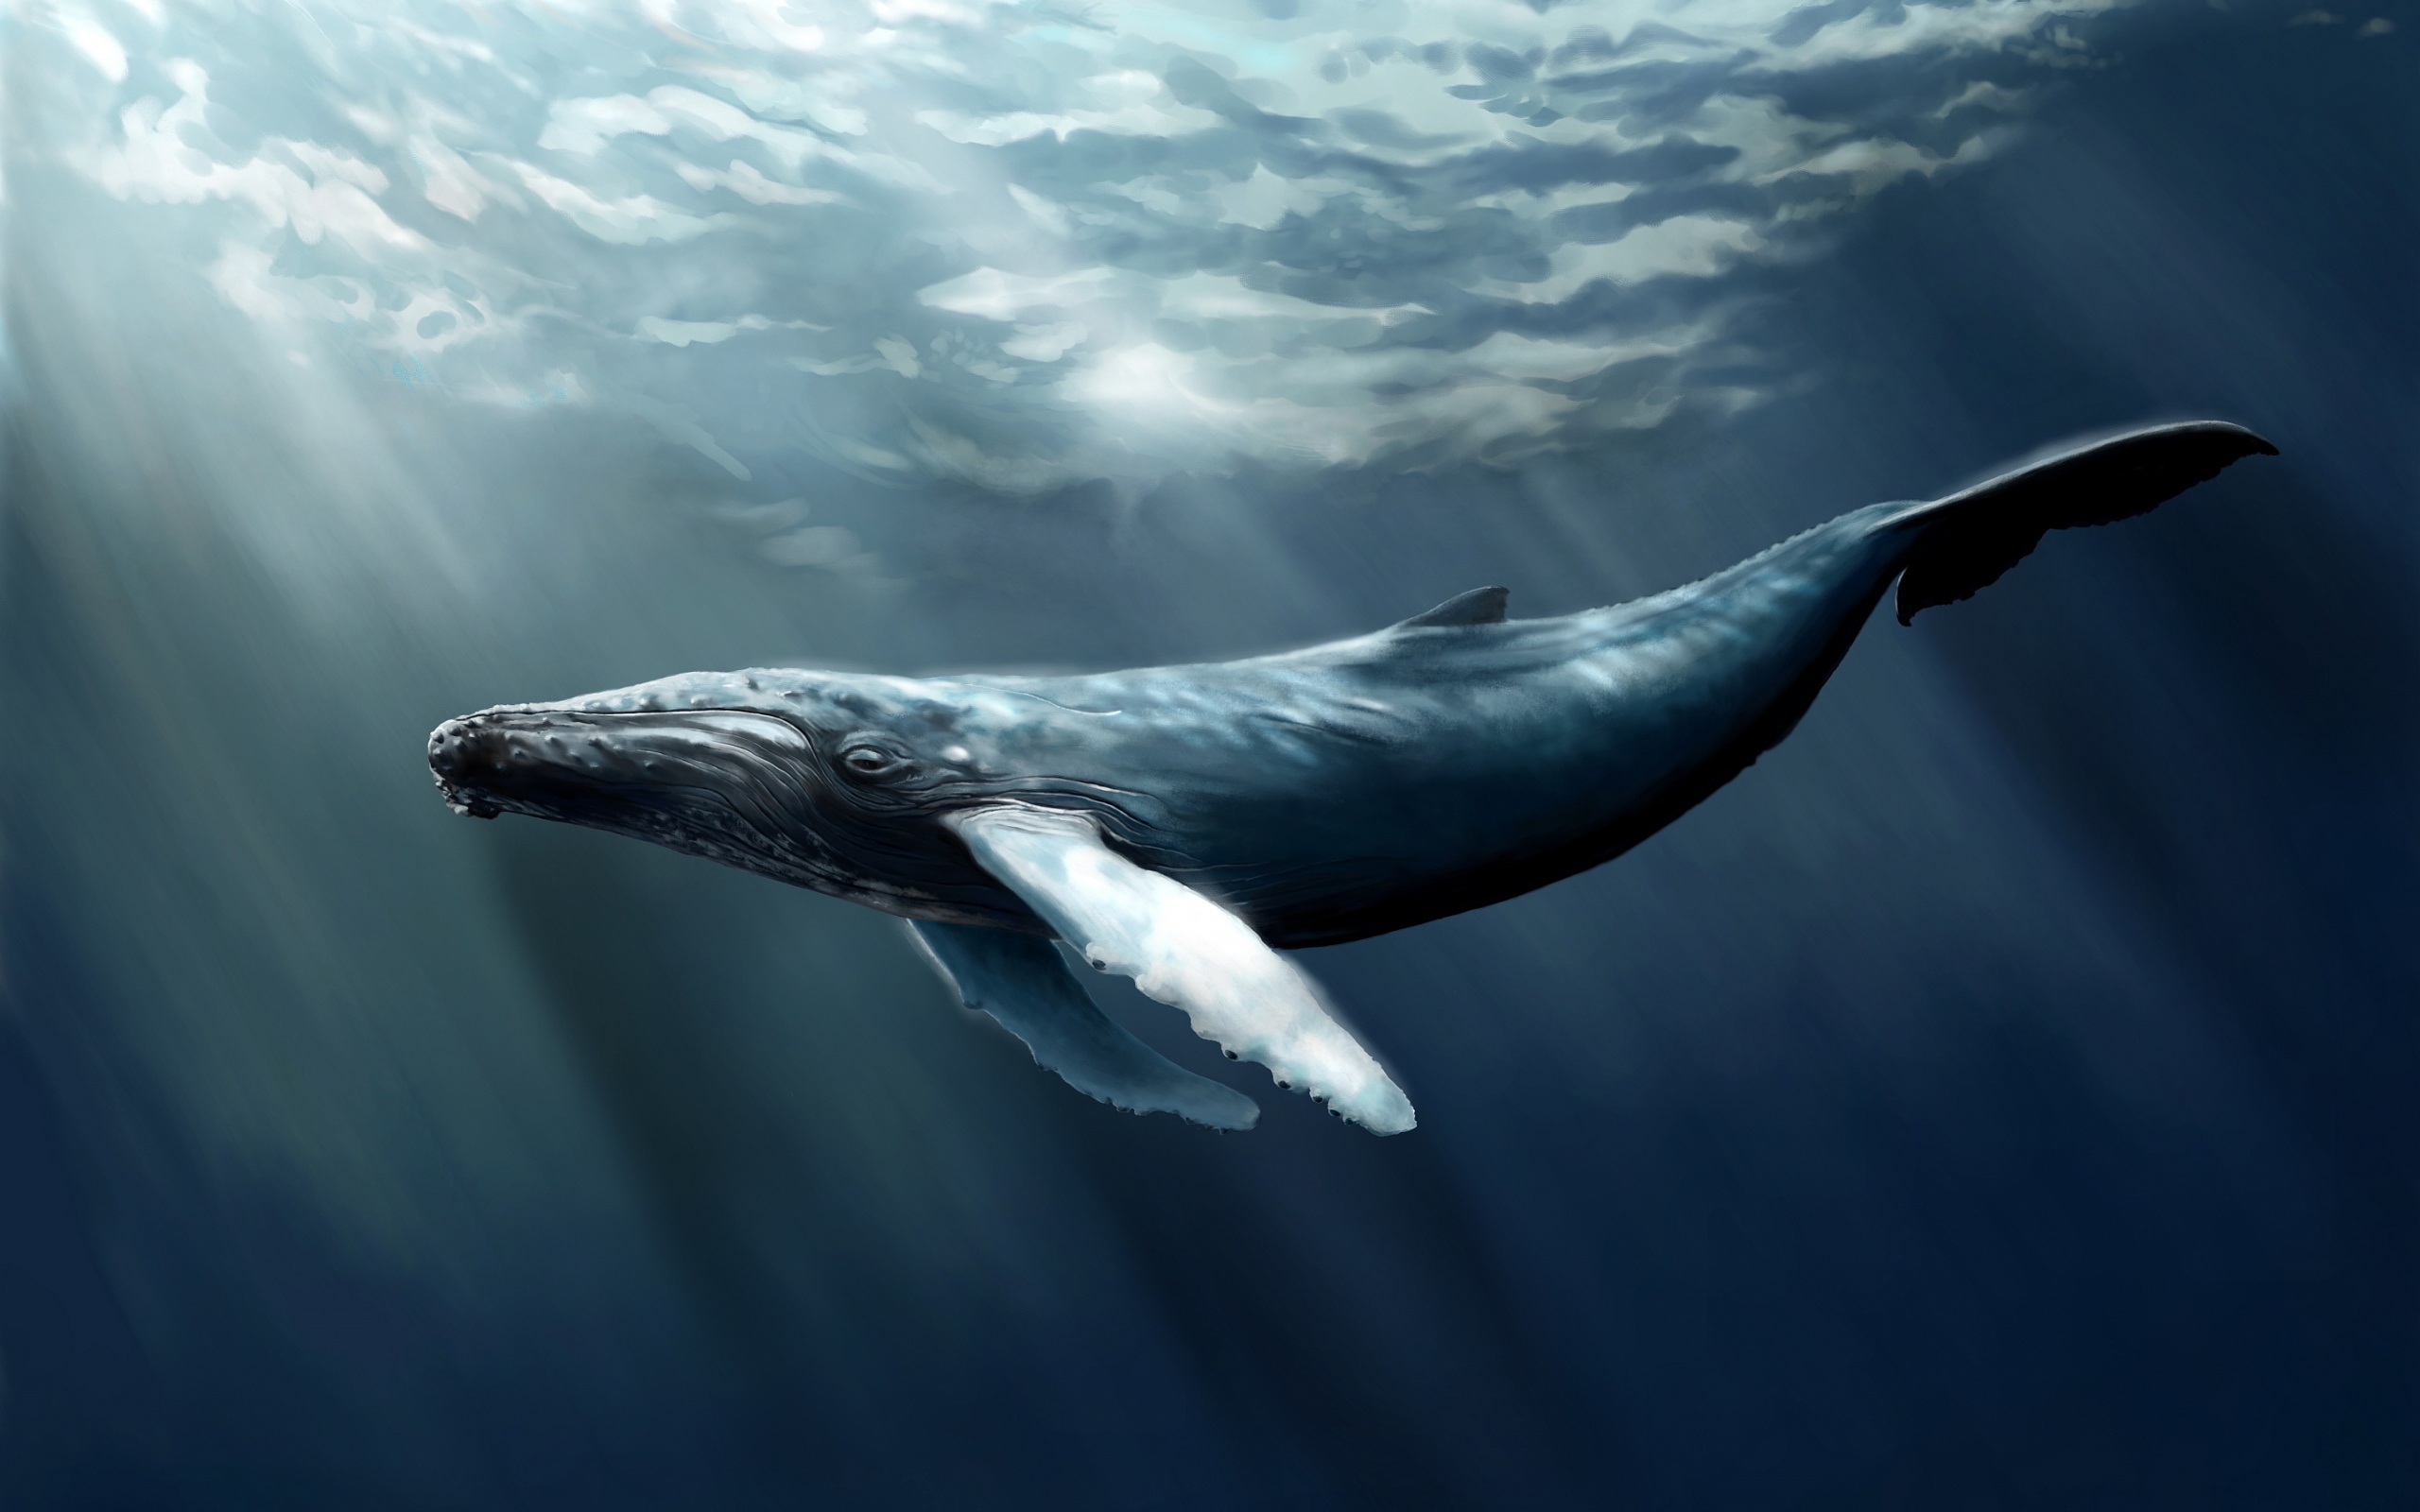 Description: The Wallpaper above is Humpback whale art Wallpaper in Resolution 2560x1600. Choose your Resolution and Download Humpback whale art Wallpaper